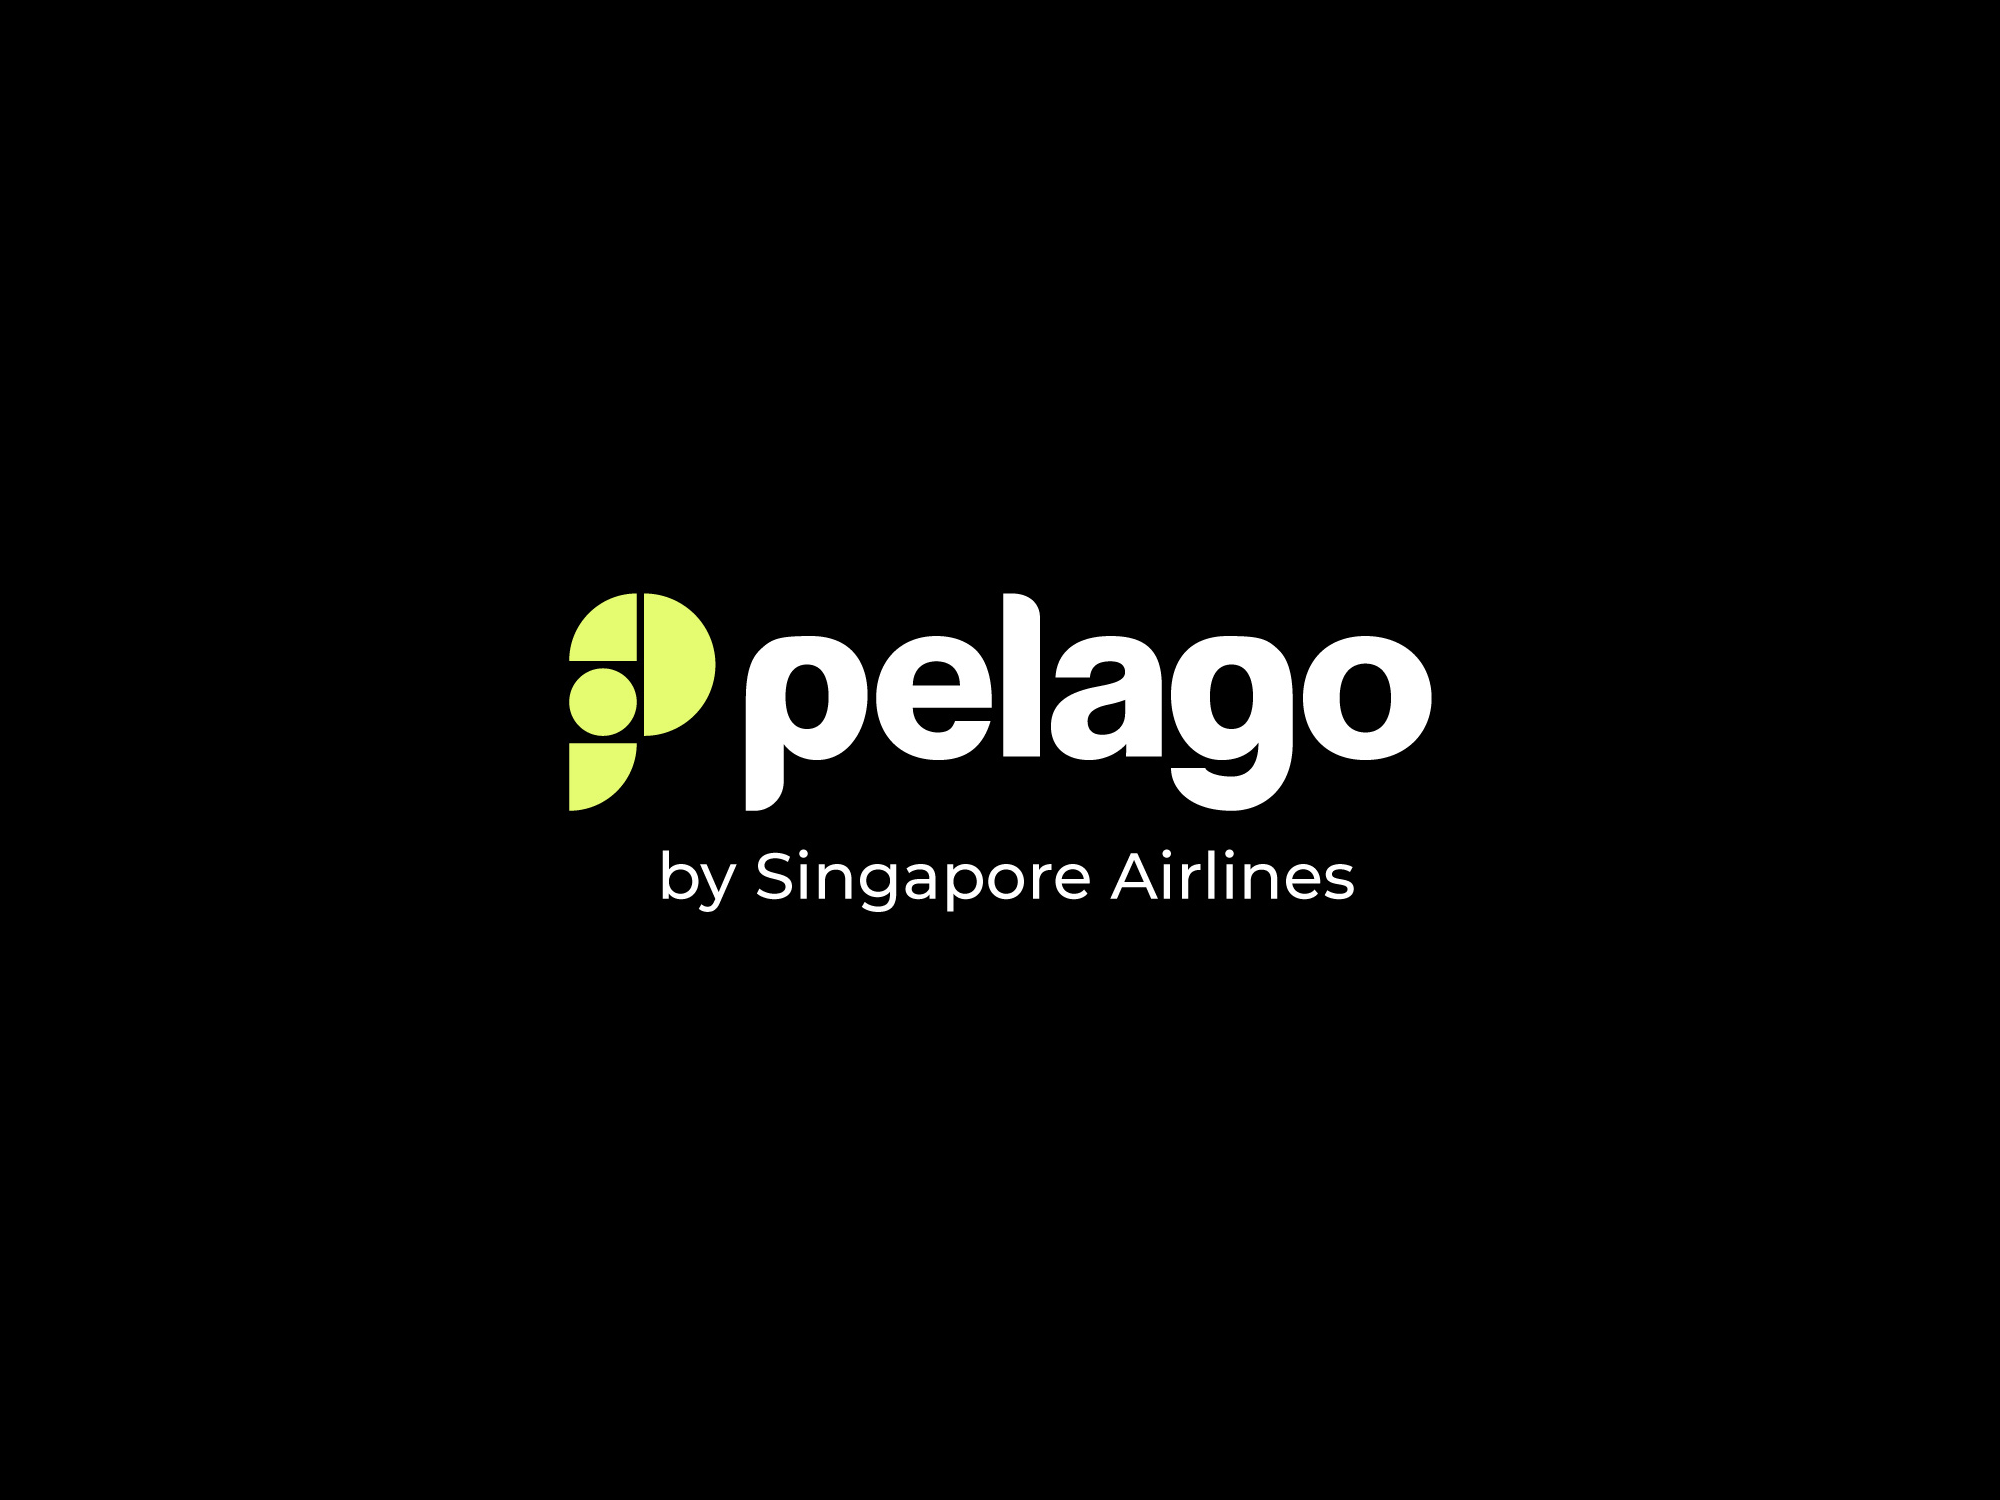 Pelago-DP-SIA-Text-Stacked-Black-expanded